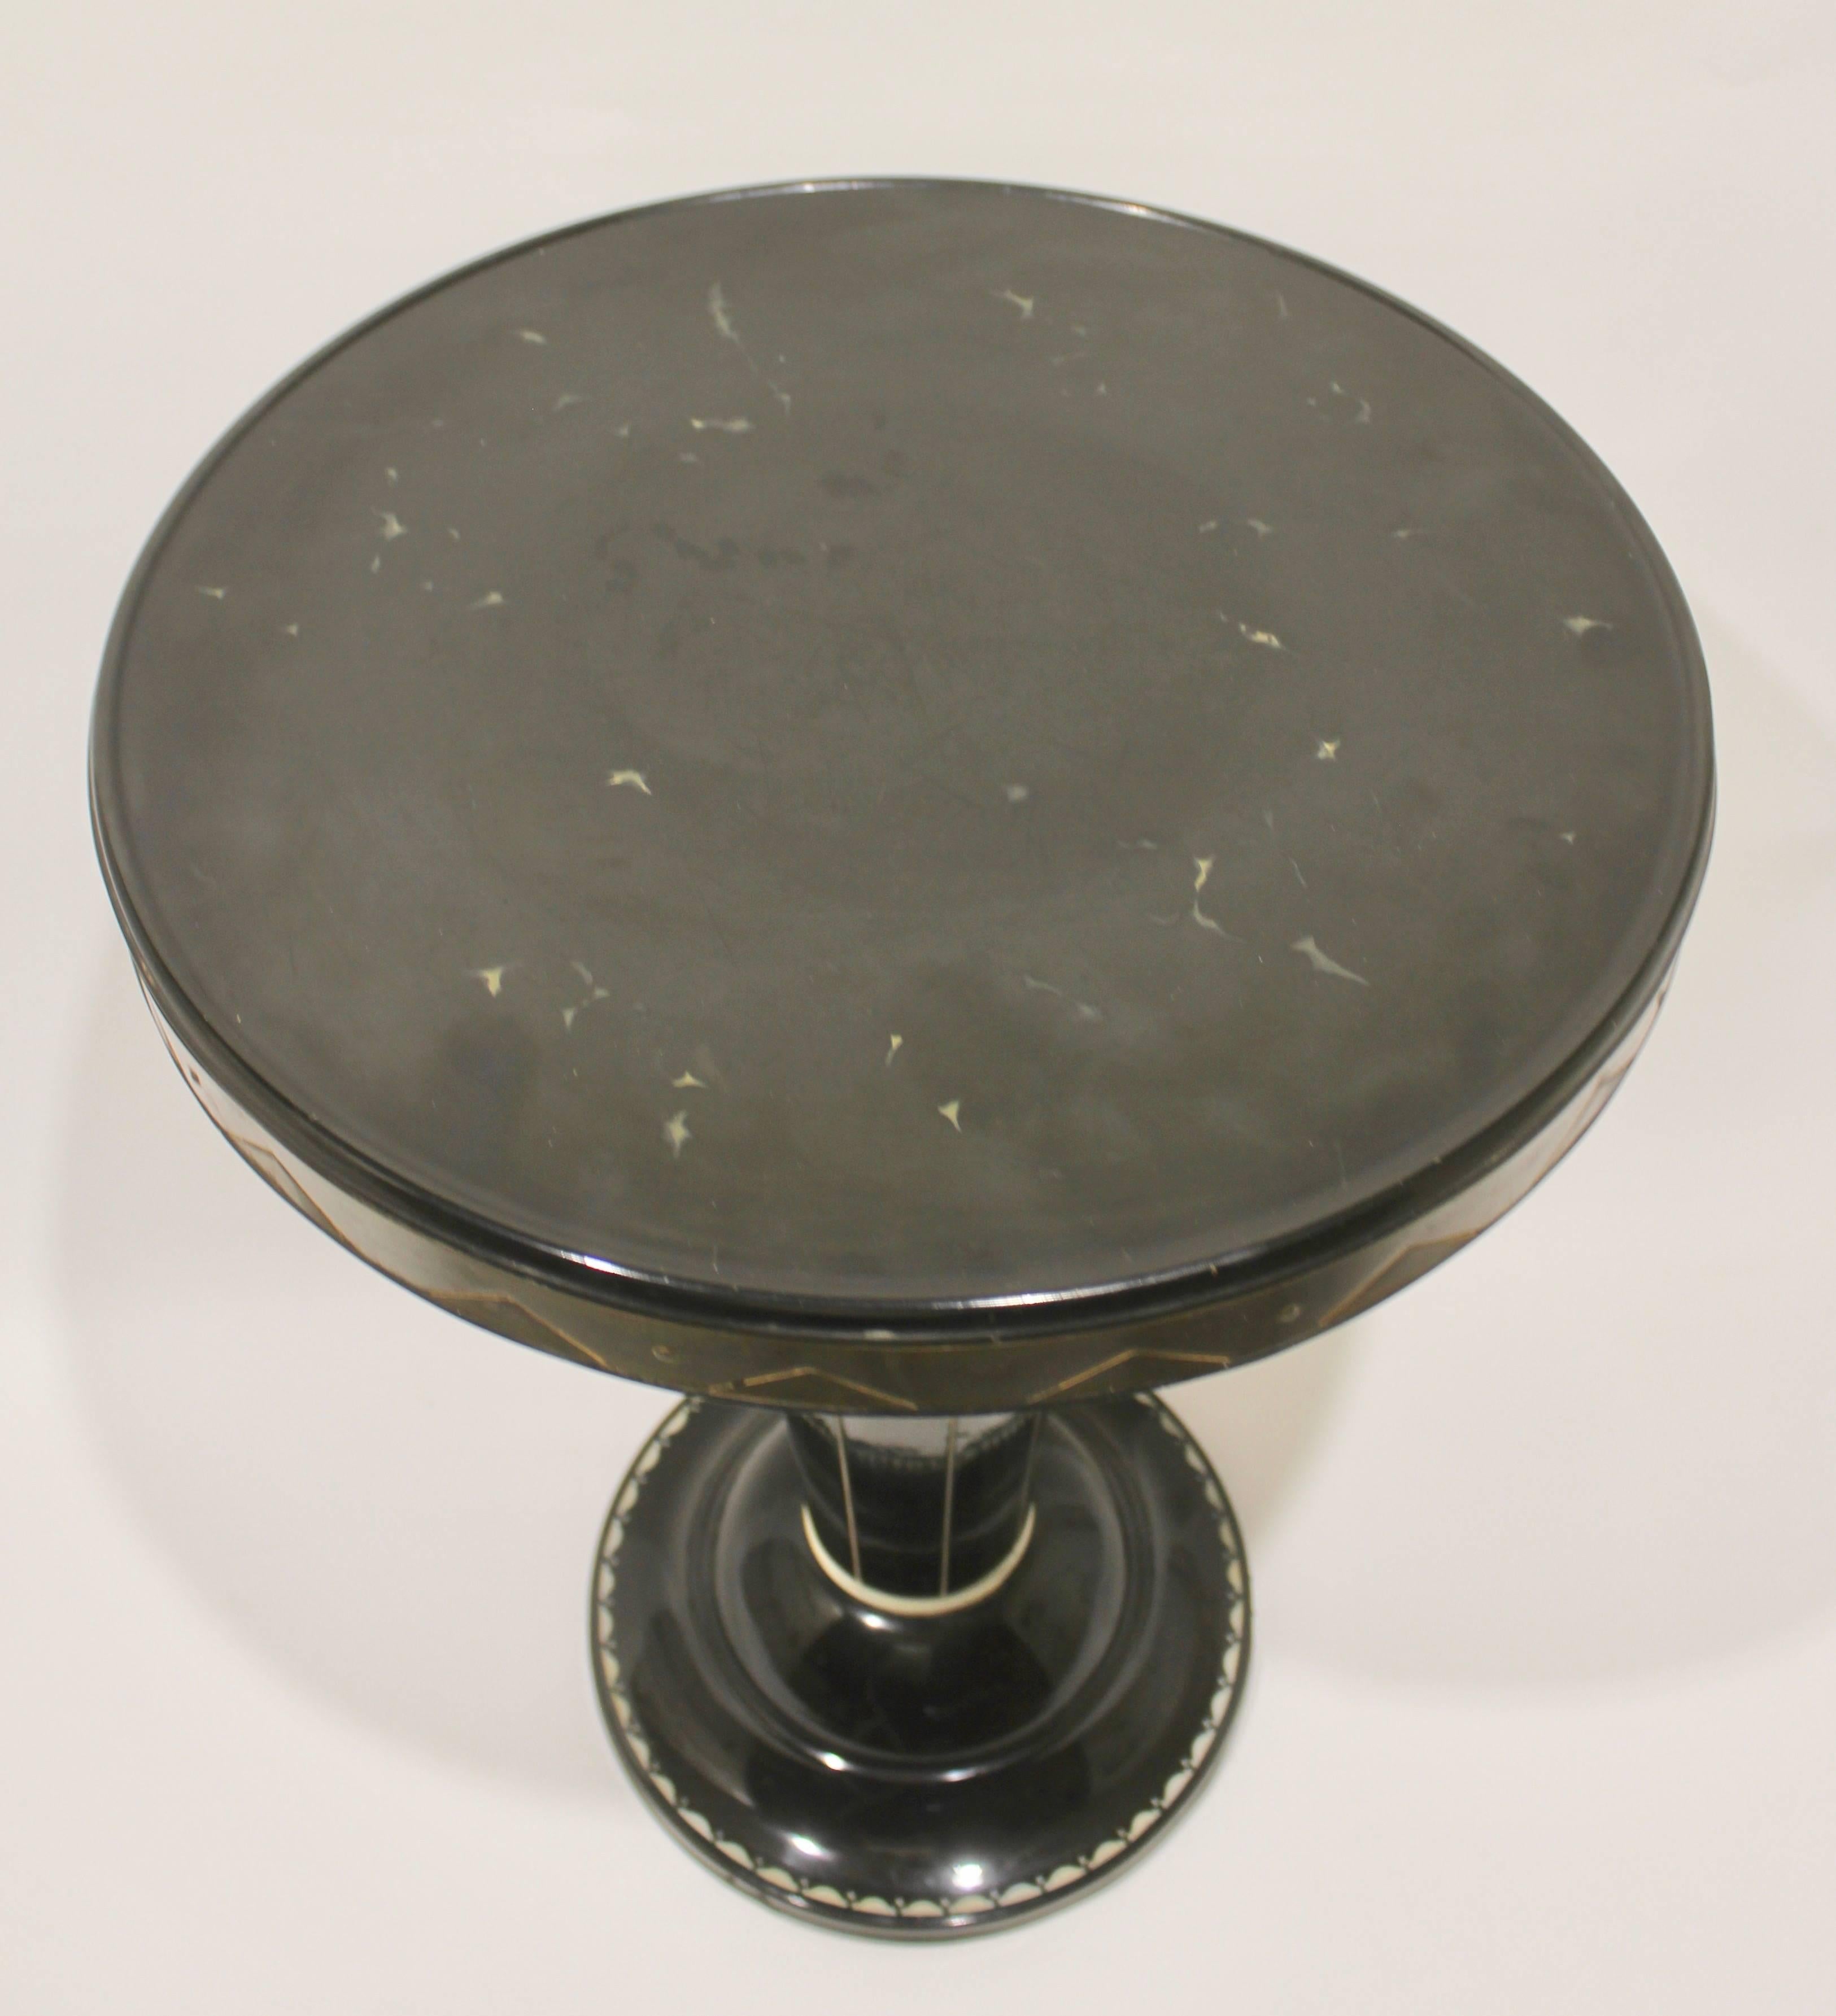 20th Century Cast Iron Metal Enamel Side Table with Stylized Design